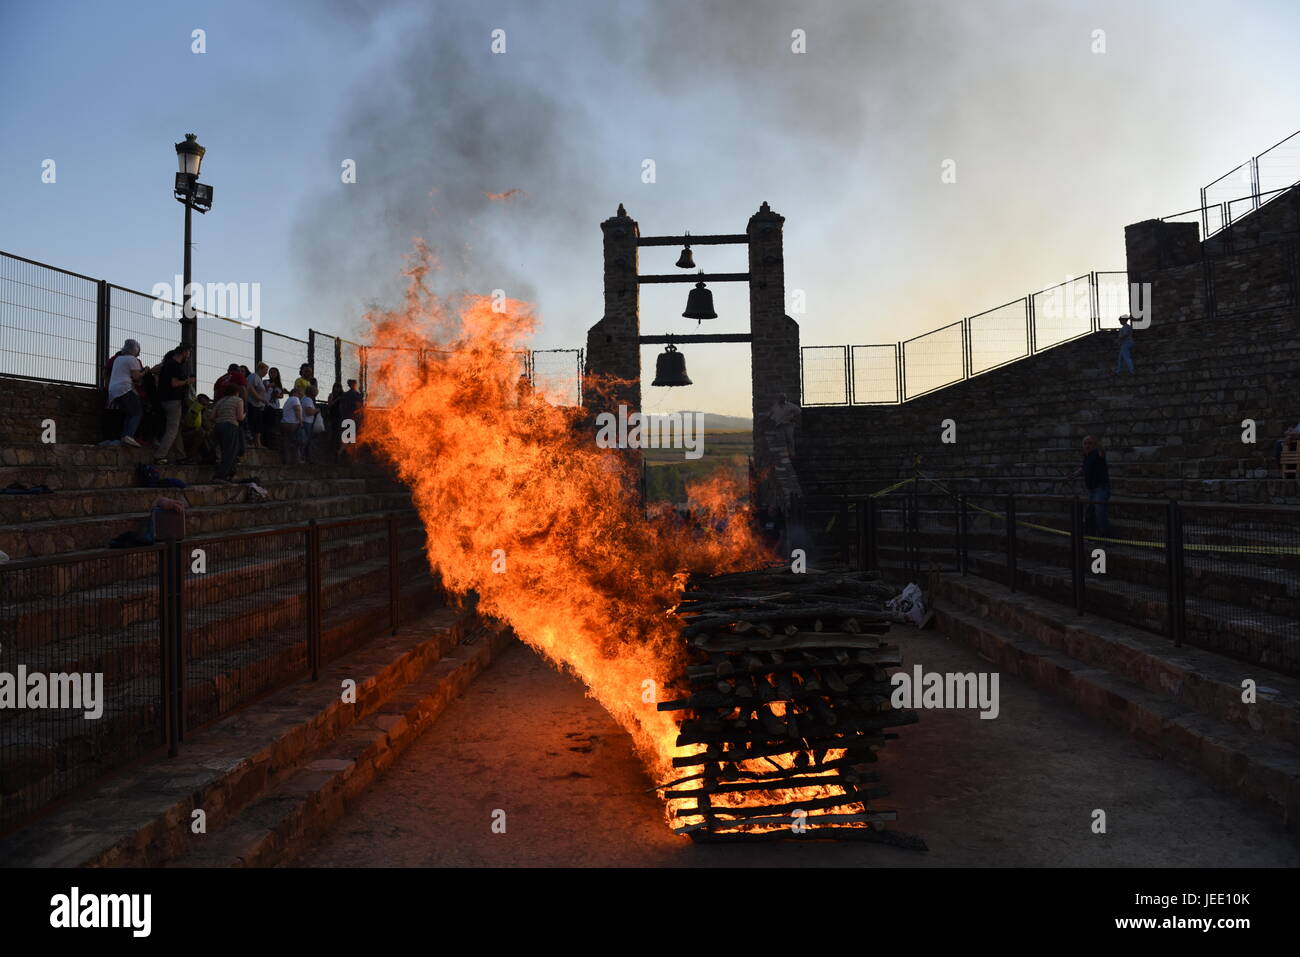 People view a fire before walking on the burning embers during the night of San Juan in San Pedro Manrique, northern Spain. (Photo byJorge Sanz/Pacific Press) Stock Photo